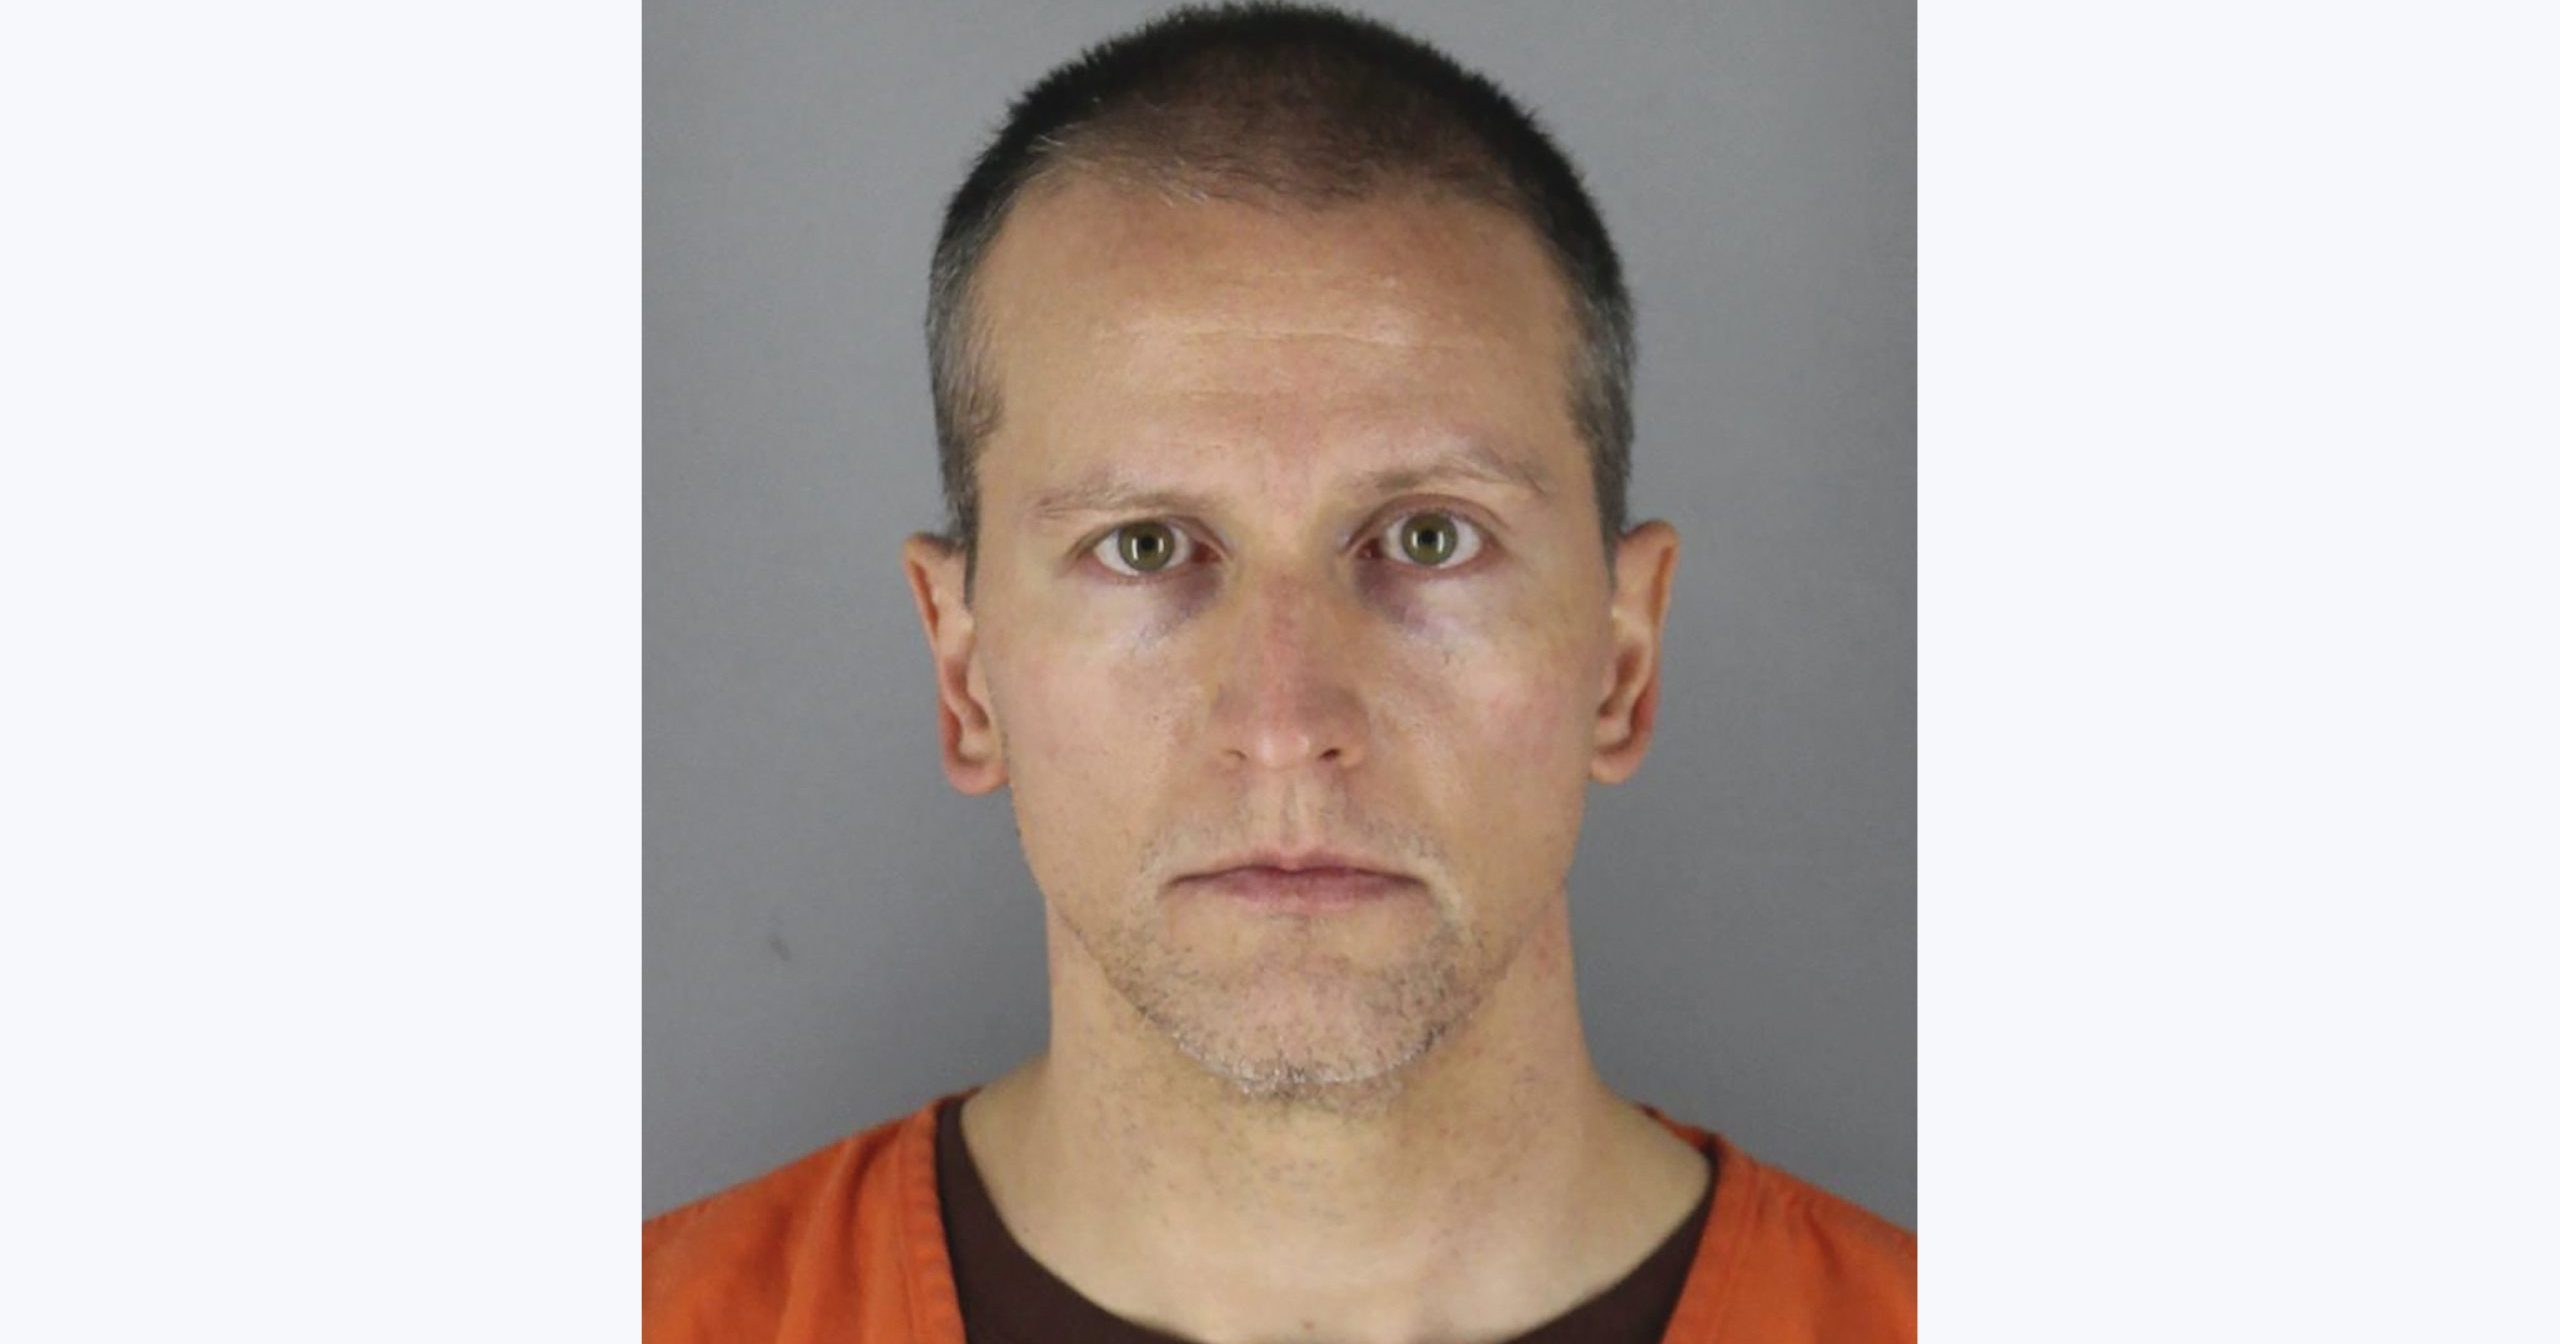 This May 31, 2020 photo provided by the Hennepin County Sheriff shows Derek Chauvin, who was arrested Friday, May 29, for the Memorial Day death of George Floyd. Chauvin was charged with third-degree murder and second-degree manslaughter after a video of him kneeling for several minutes on the neck of Floyd, a black man, set off a wave of protests across the country.